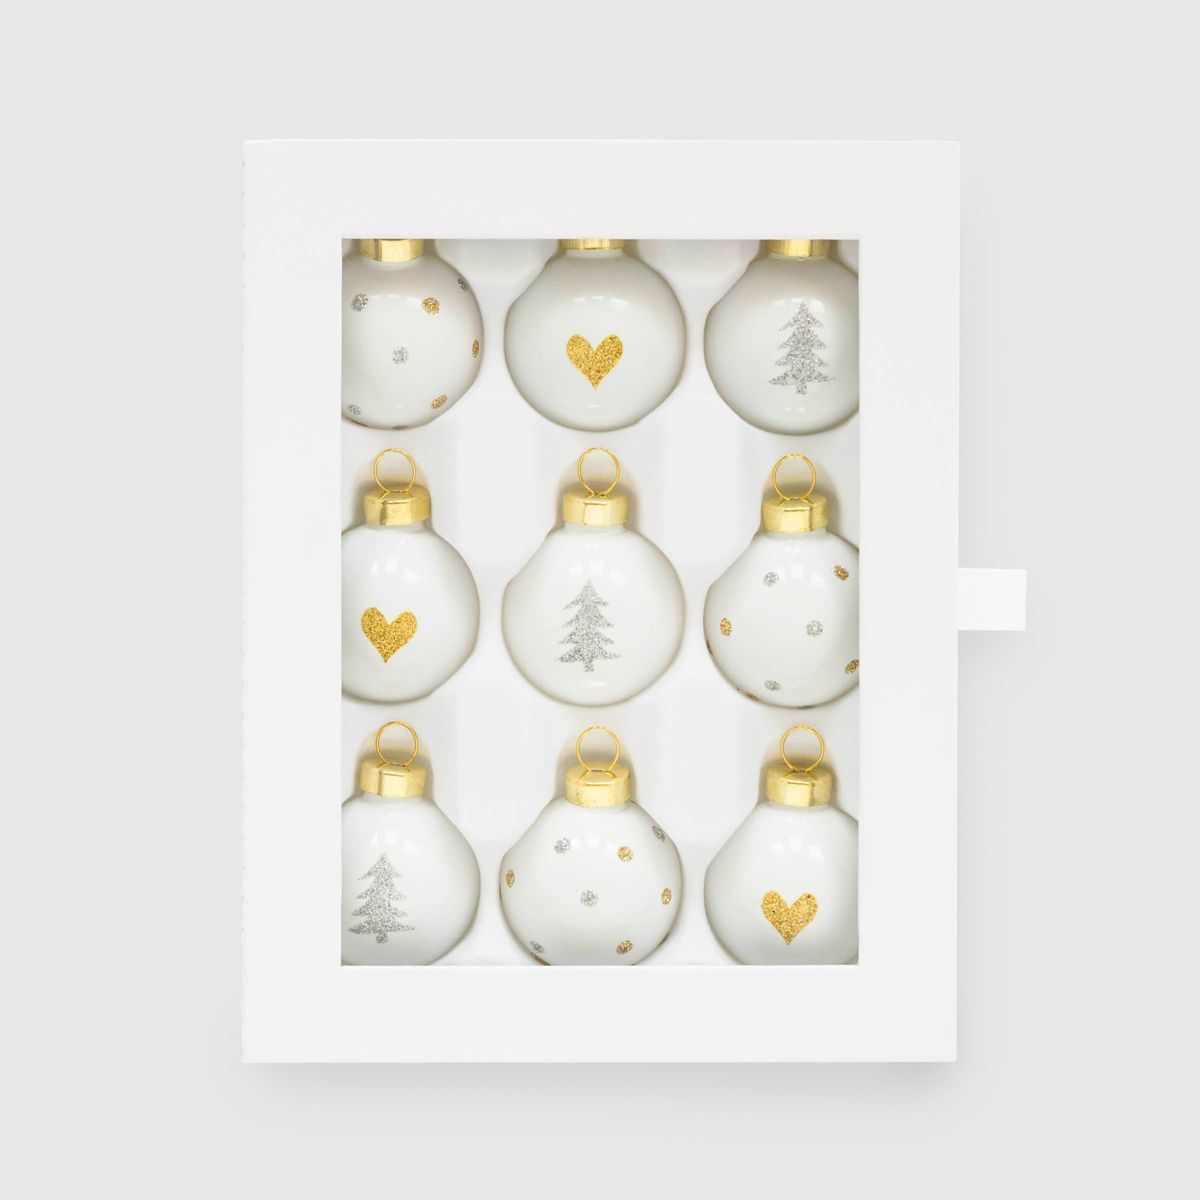 Glittered Glass Christmas Tree Ornament Set 9pc White/Gold/Silver - Sugar Paper™ + Target | Target